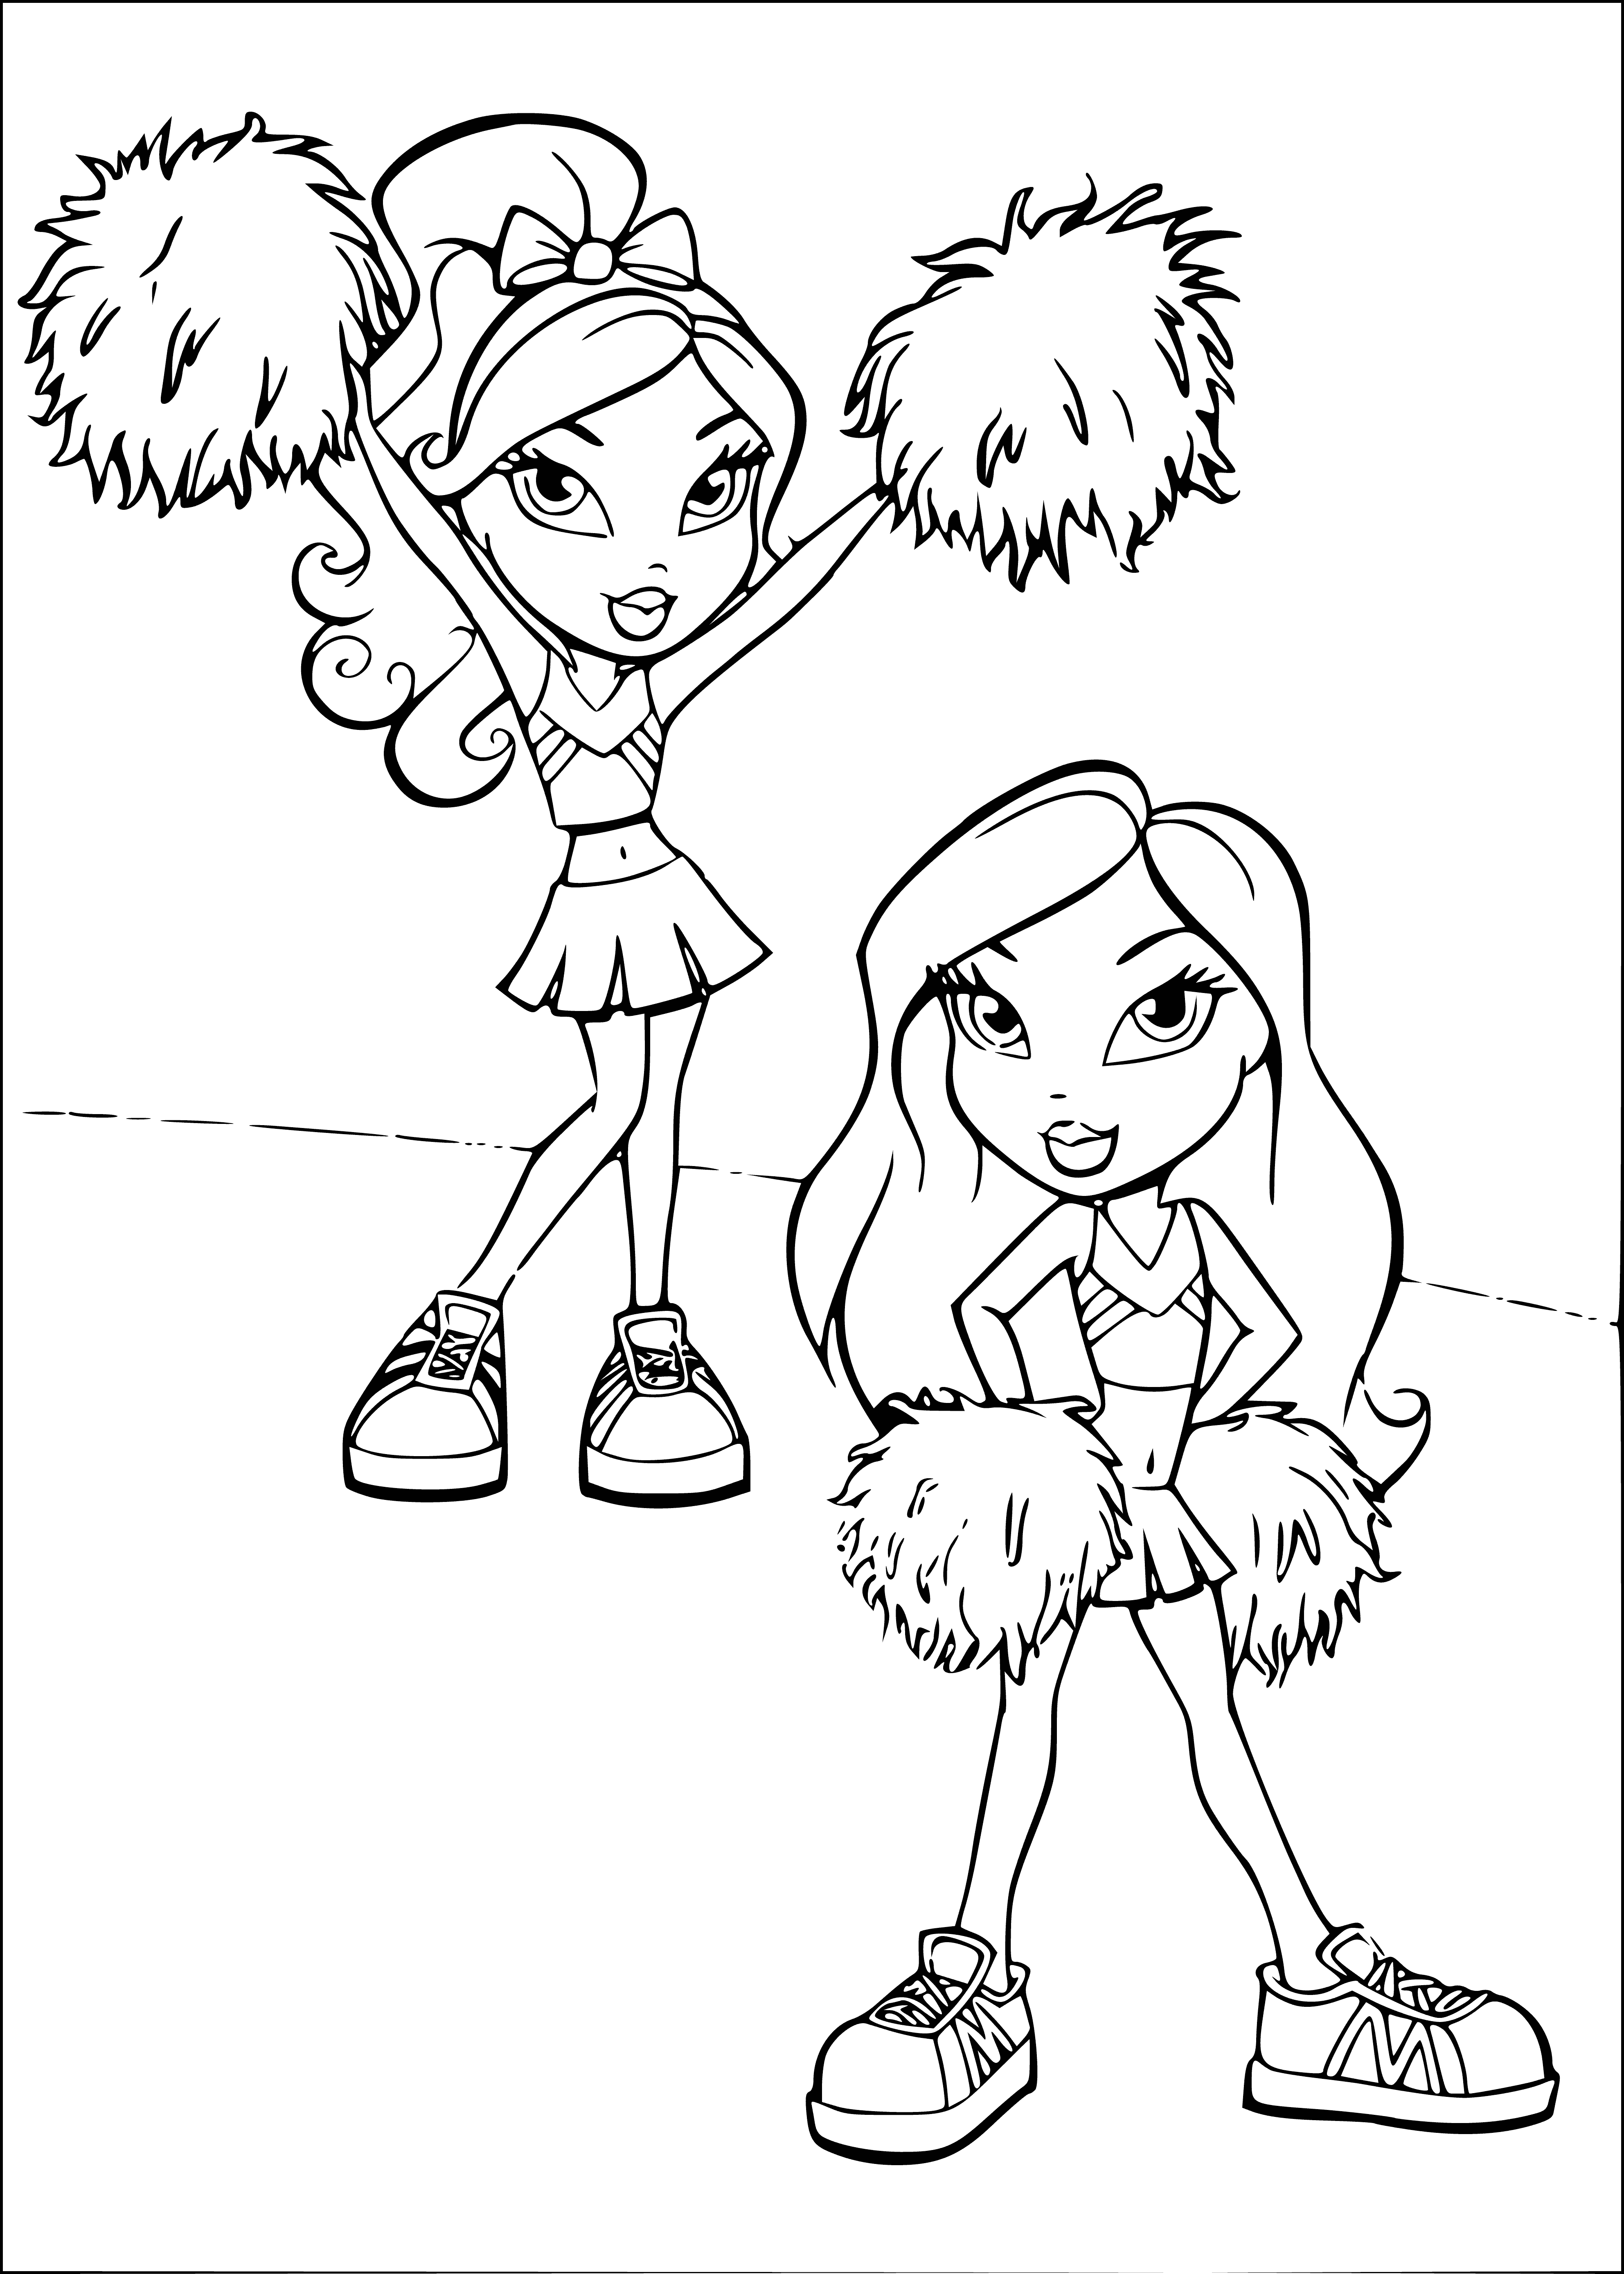 coloring page: Four dolls in coloring page: two blonde hair, brown, black, all wearing makeup & Jordan sneakers, two jeans, two dresses.